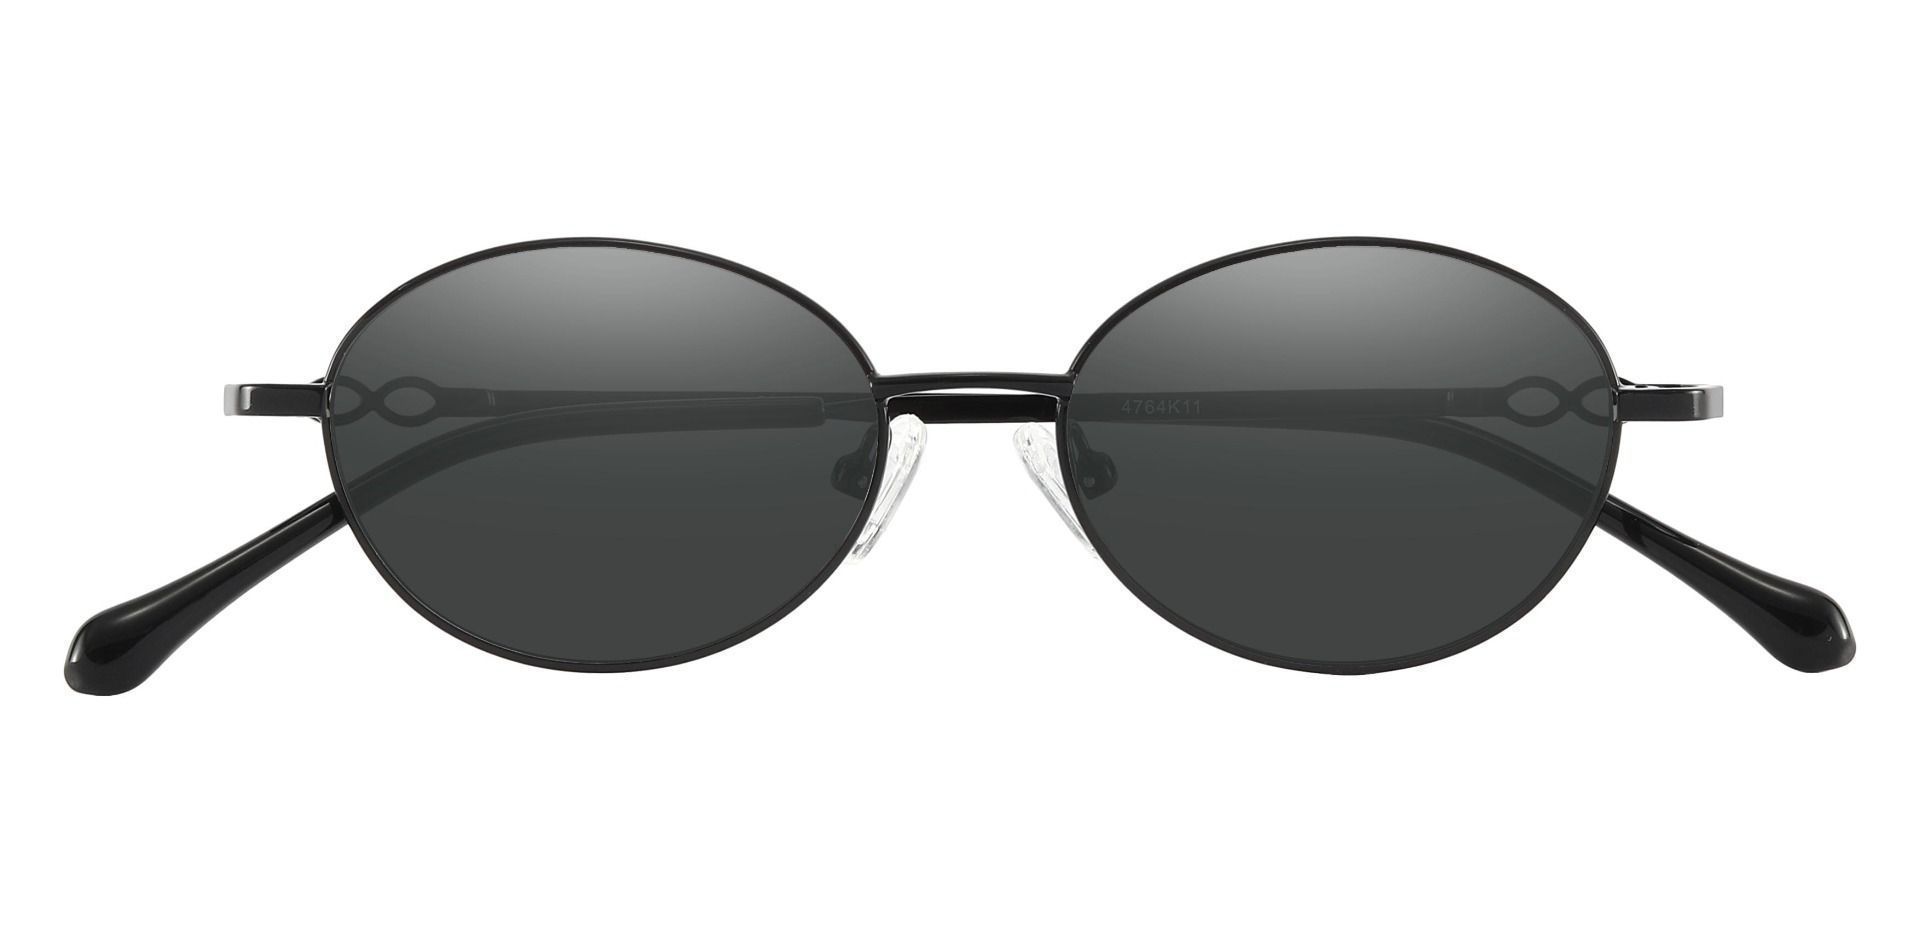 Odyssey Oval Reading Sunglasses - Black Frame With Gray Lenses